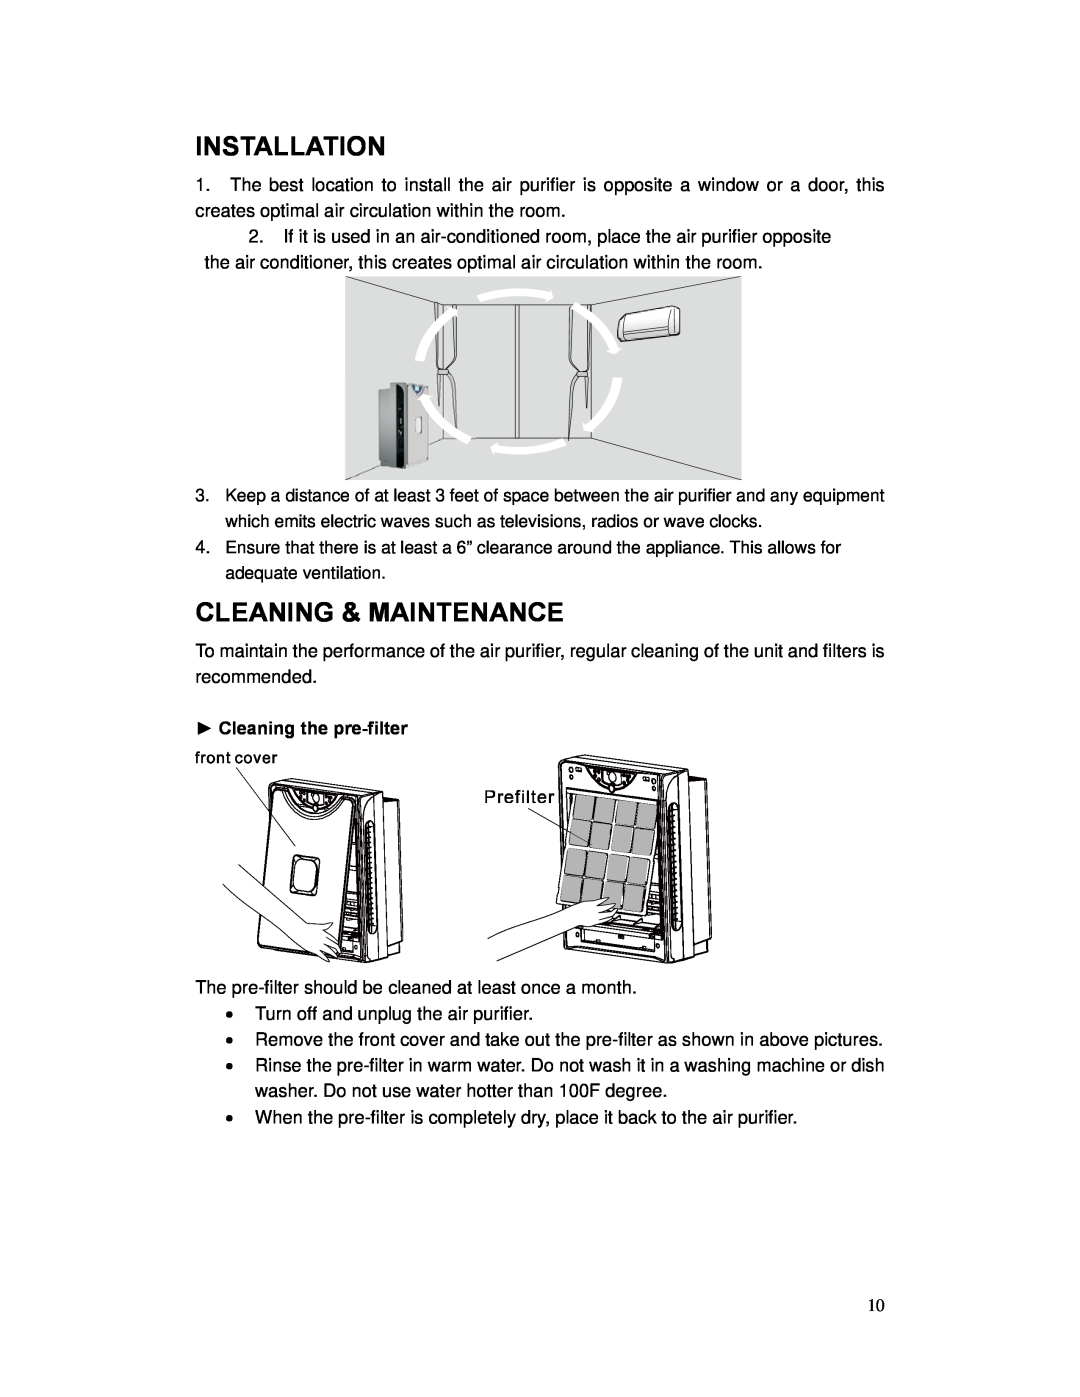 Whynter AFR-300 instruction manual Installation, Cleaning & Maintenance, Cleaning the pre-filter 